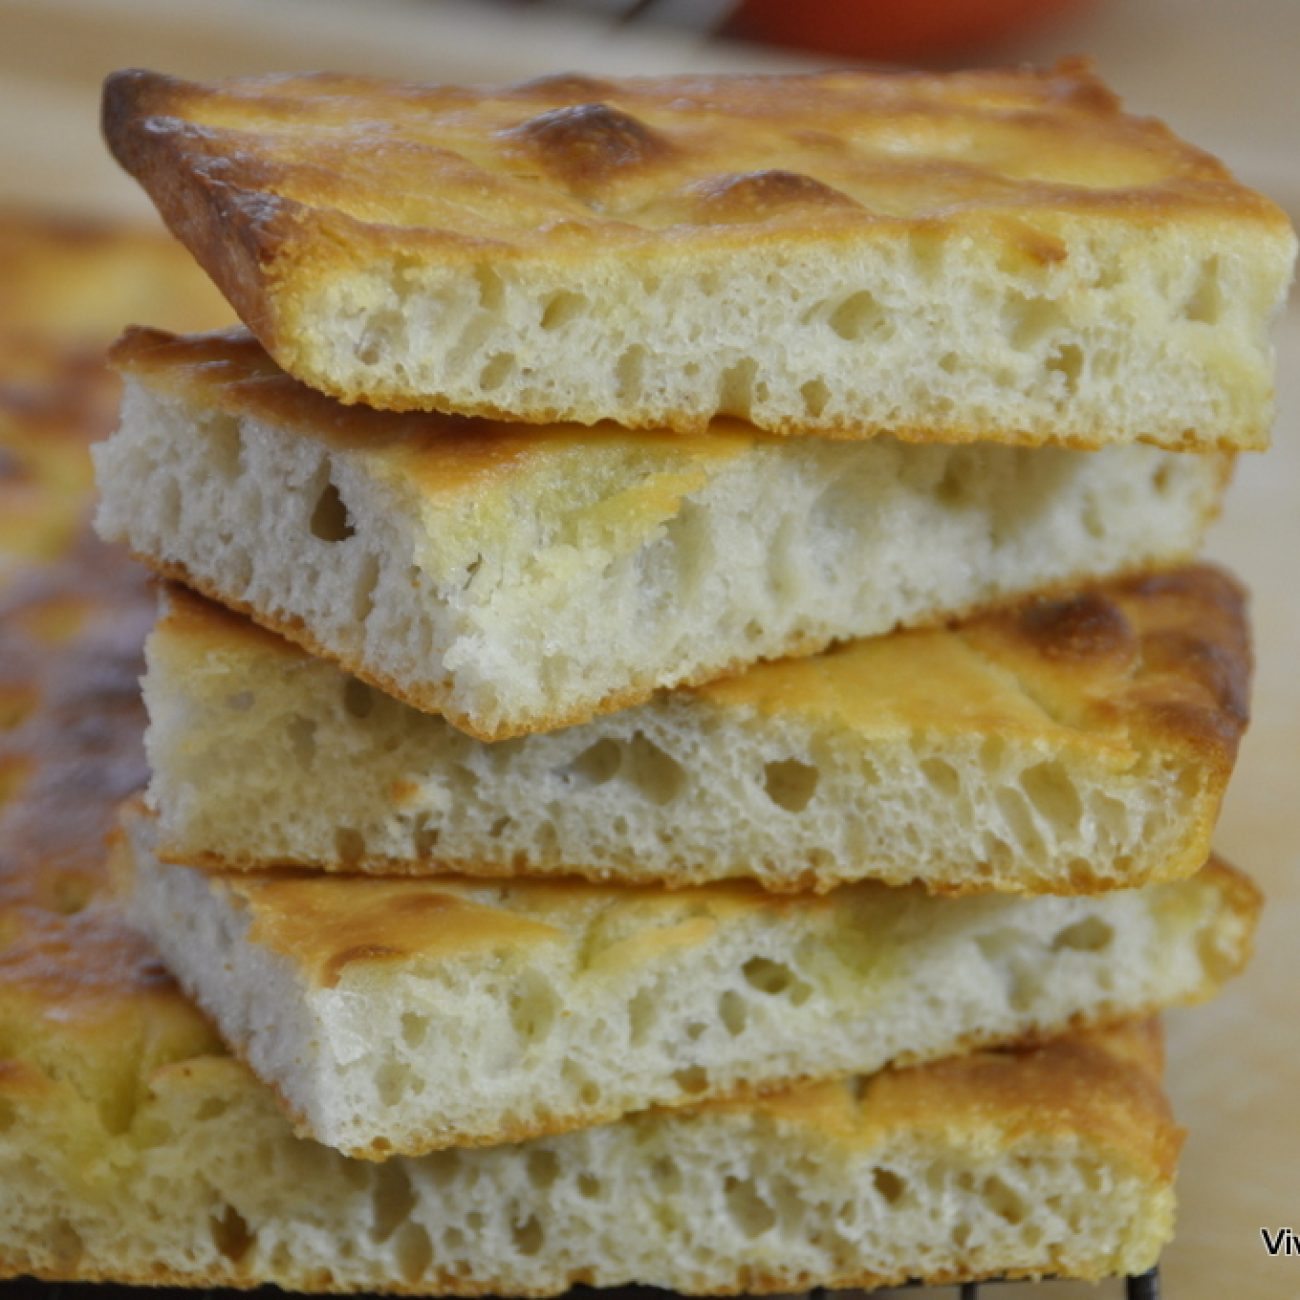 Pictures of Your Home Made Focaccia Bread